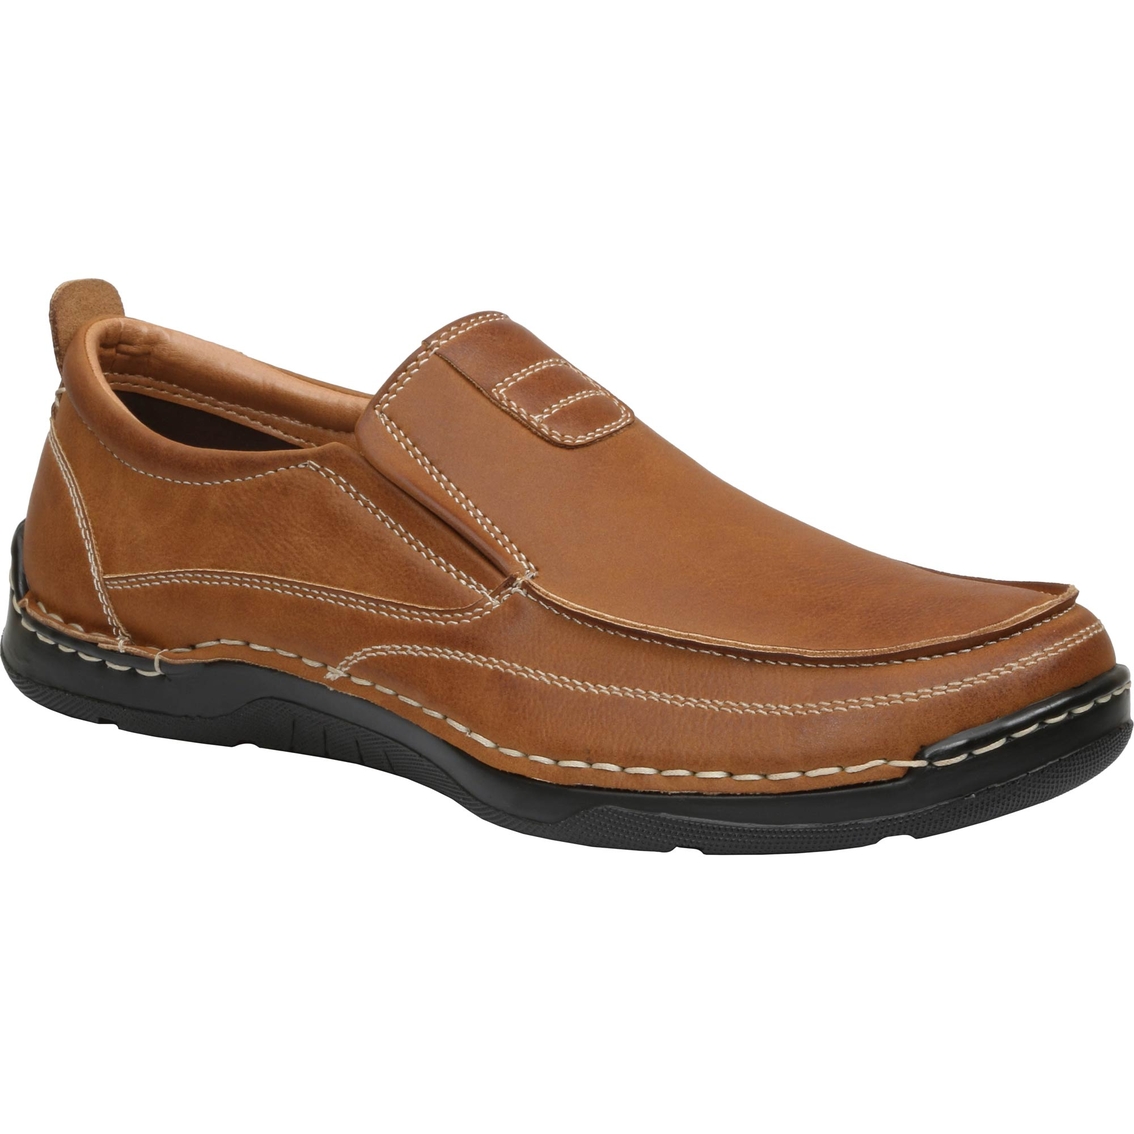 Izod Forman Slip On Casual Shoes | Casuals | Shoes | Shop The Exchange